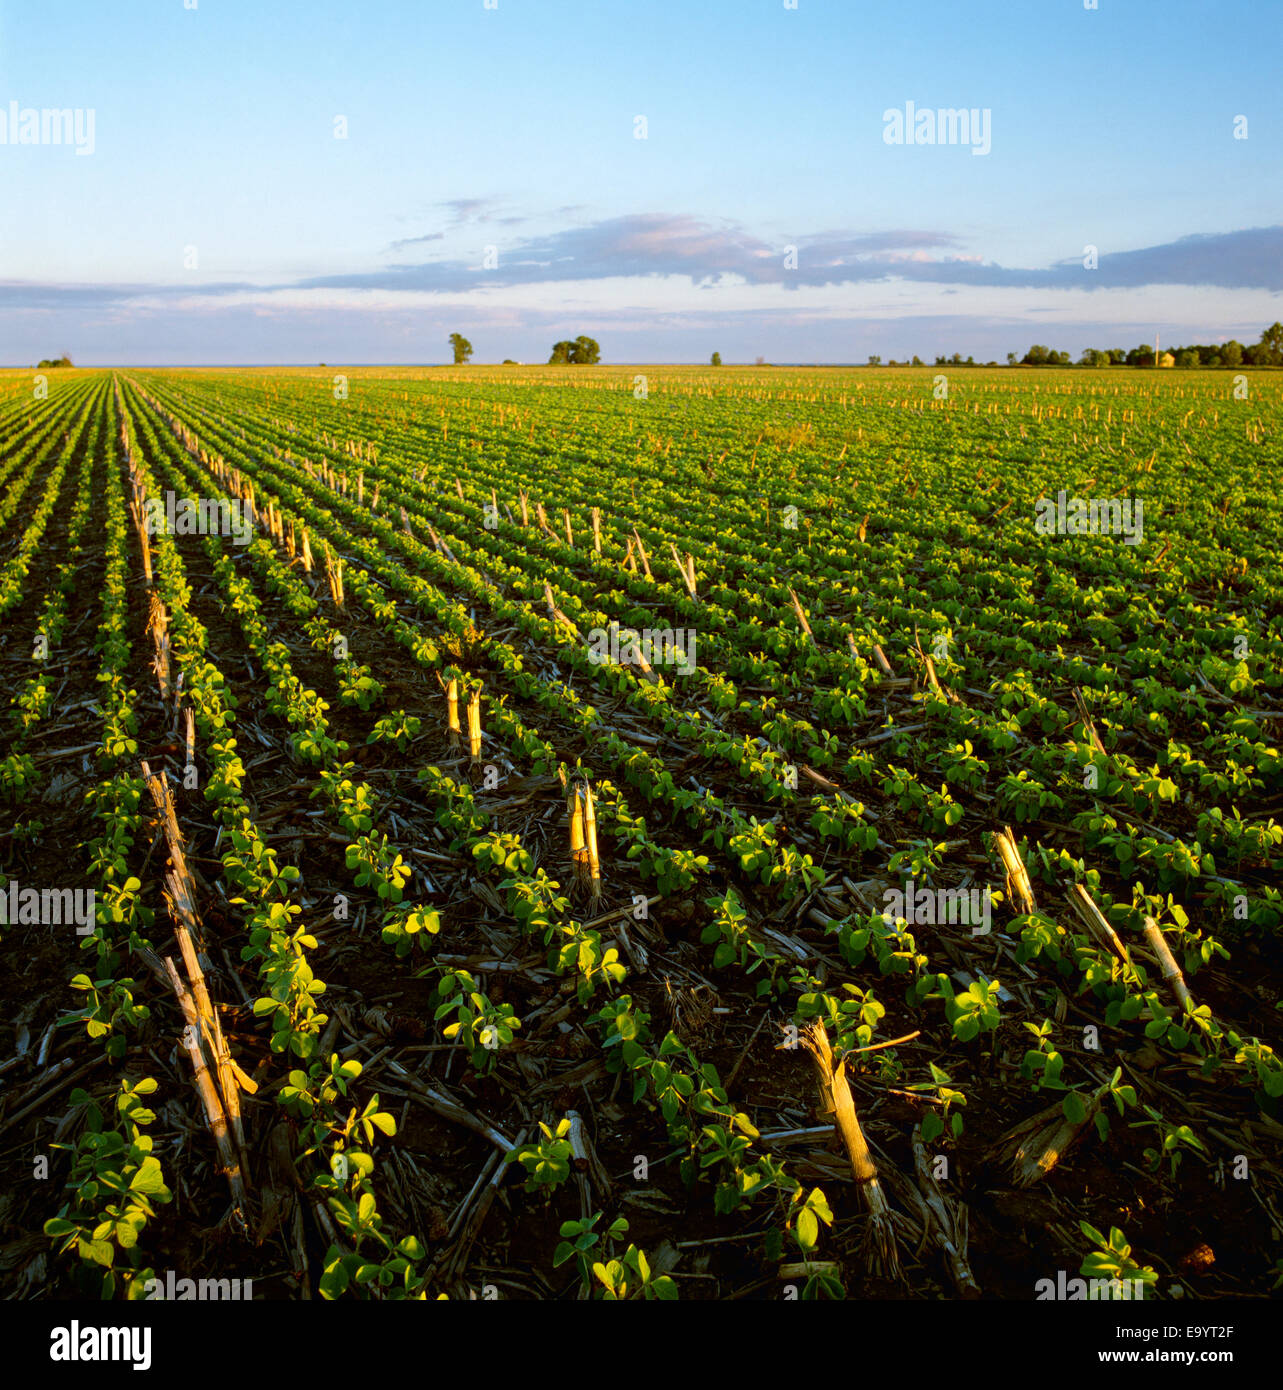 Agriculture - Early growth no-till soybeans emerging in grain corn stubble in late afternoon light / Ontario, Canada. Stock Photo